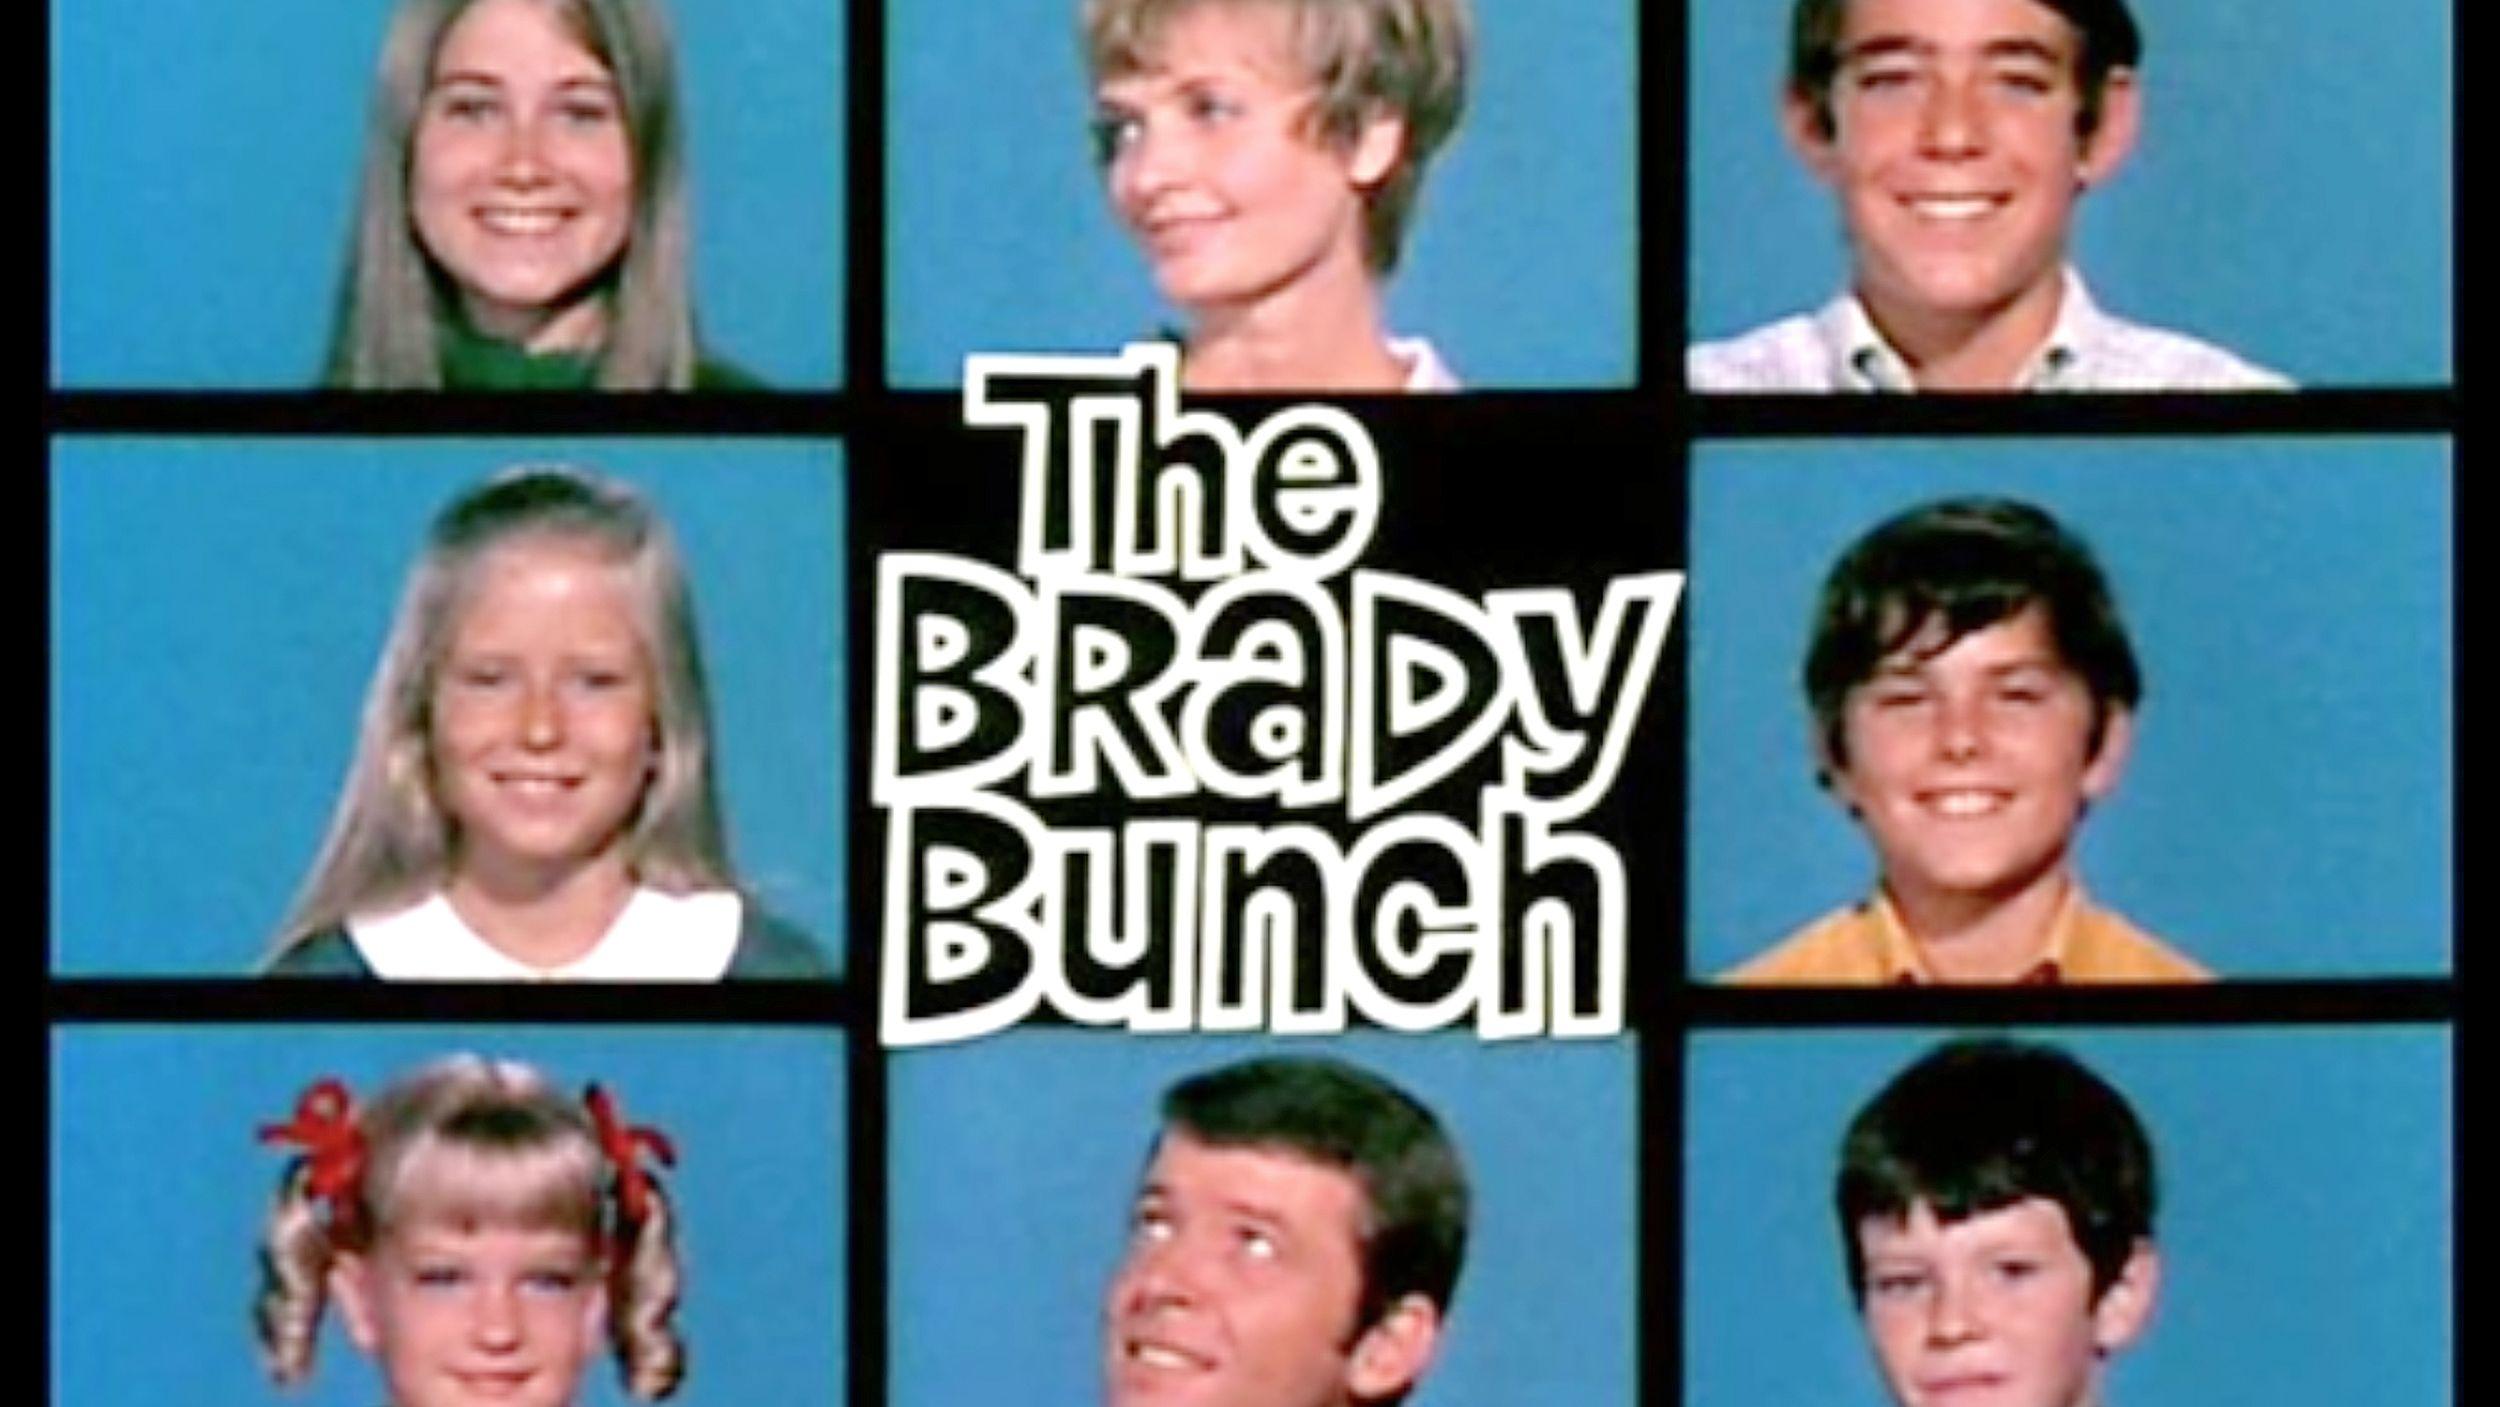 things about 'The Brady Bunch' you may not know